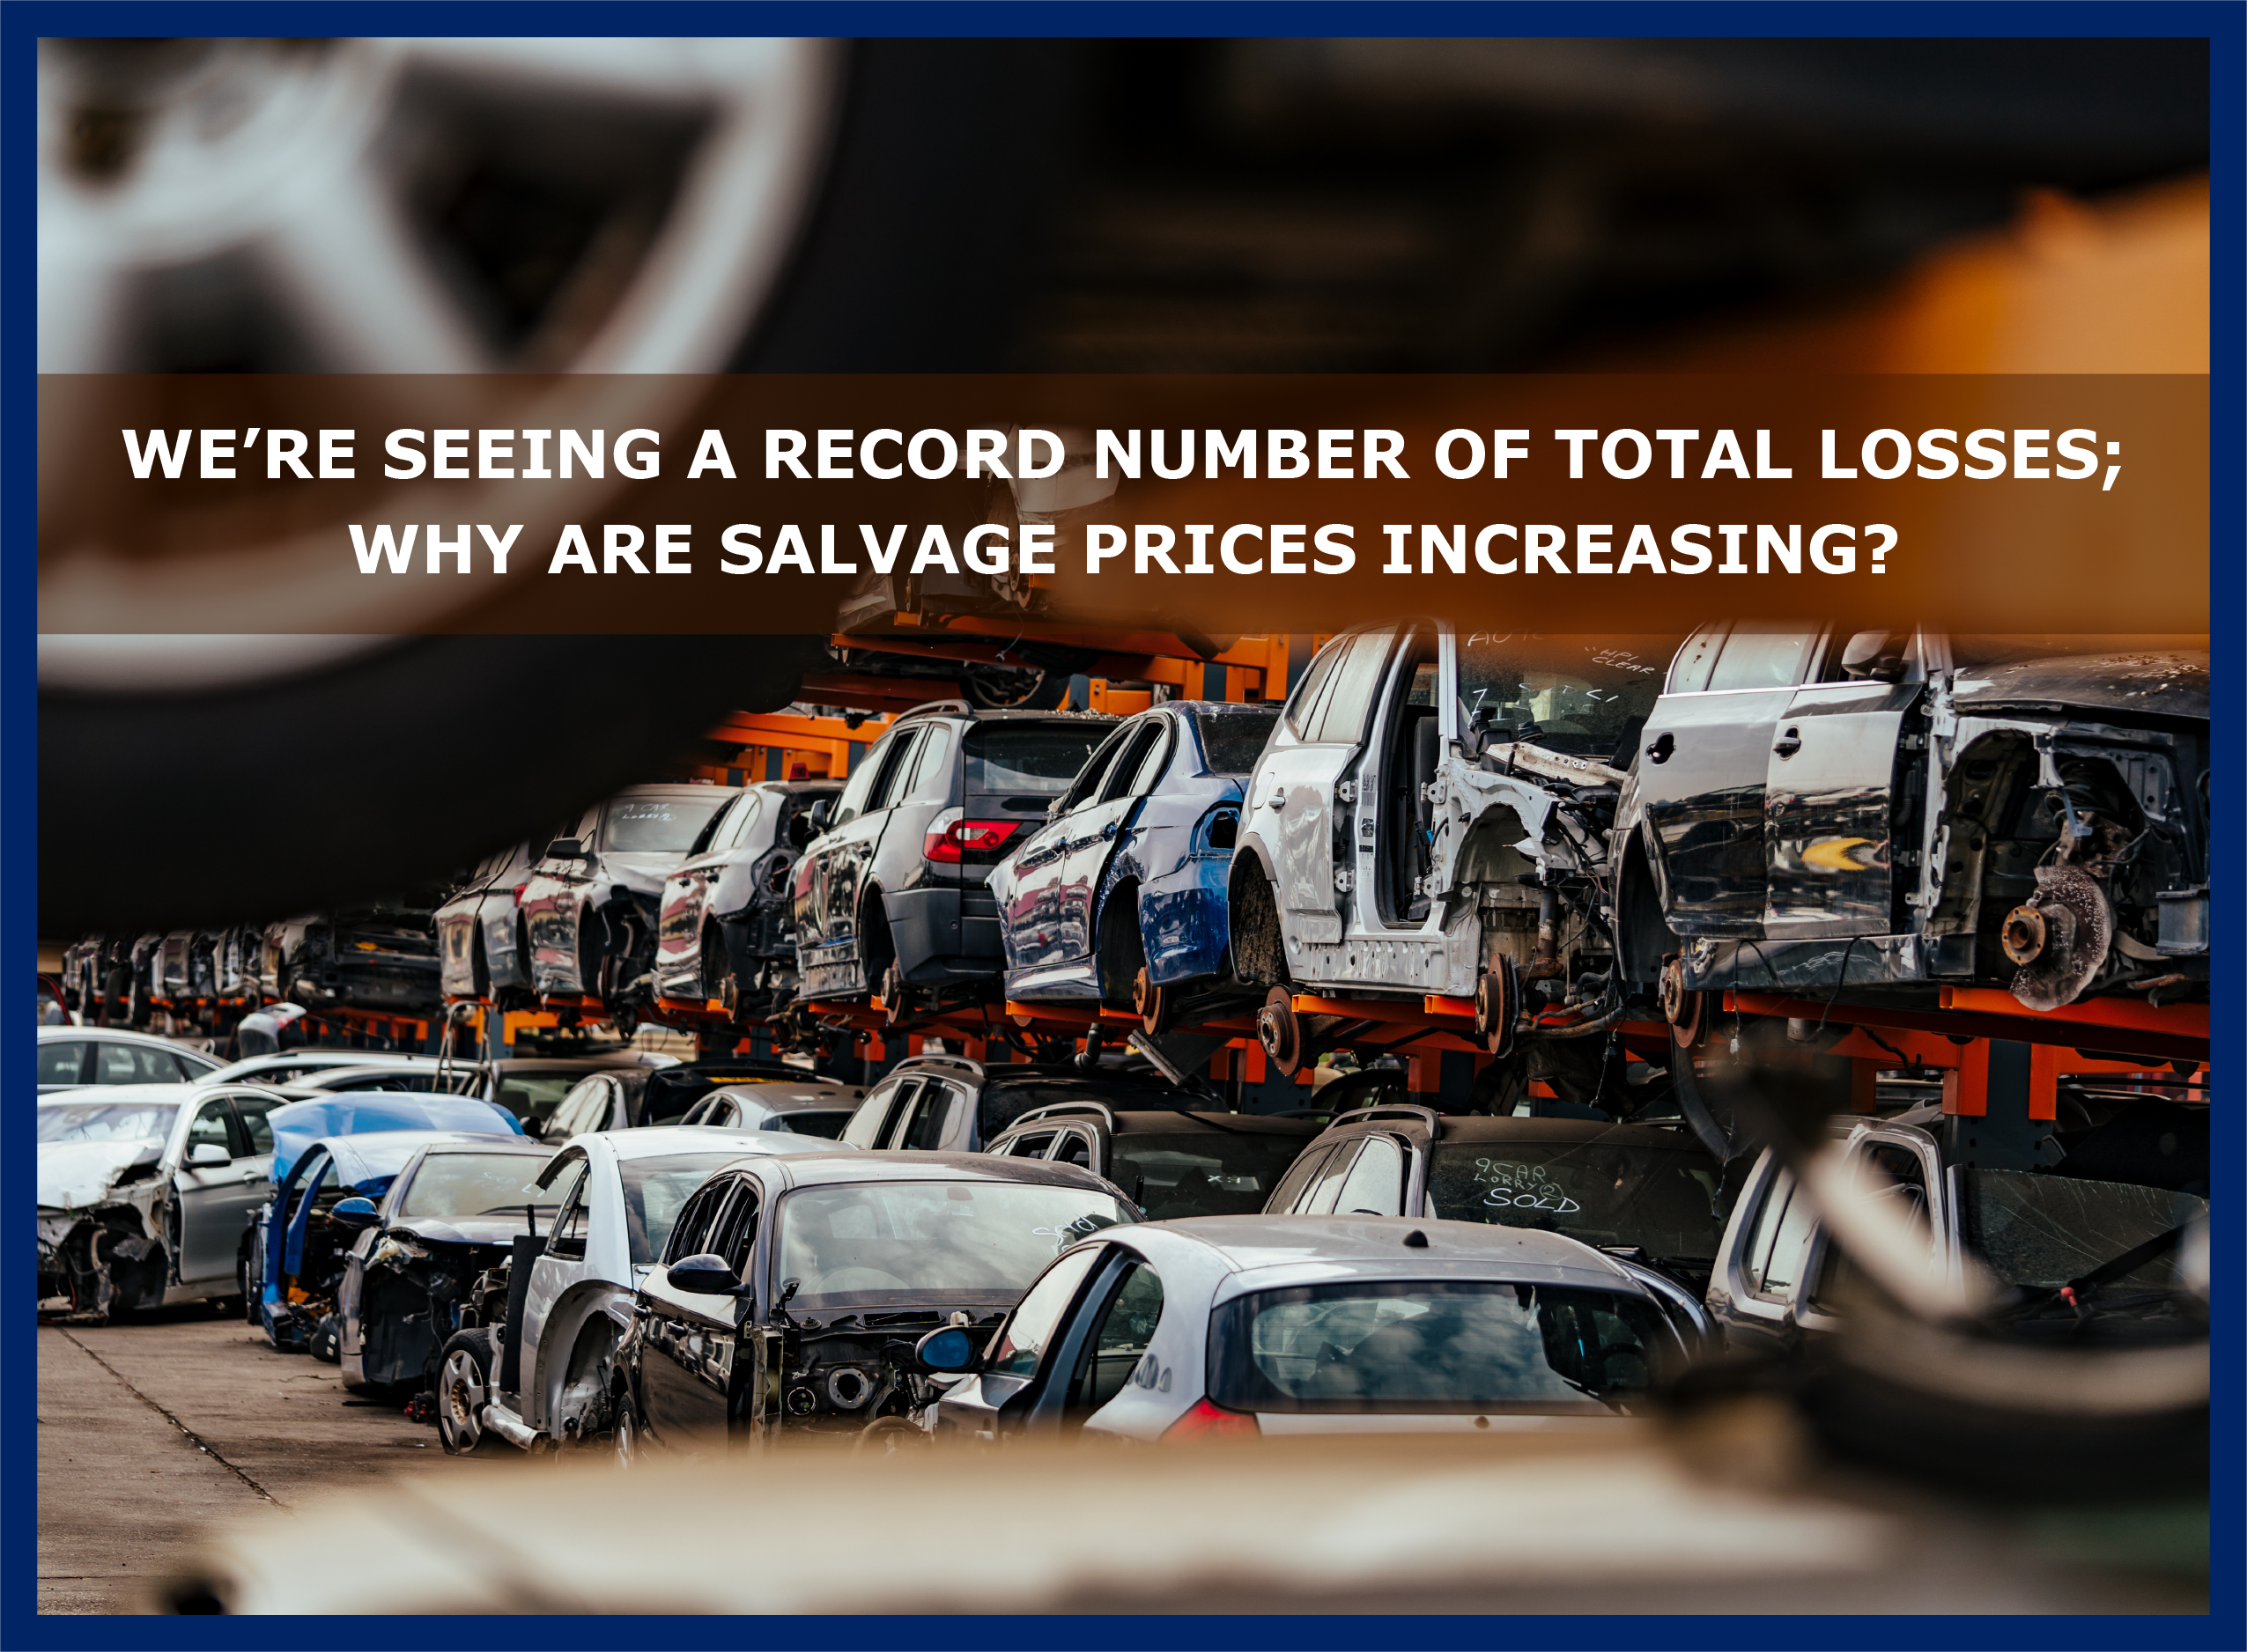 Even with a record number of total losses, salvage prices are still increasing.